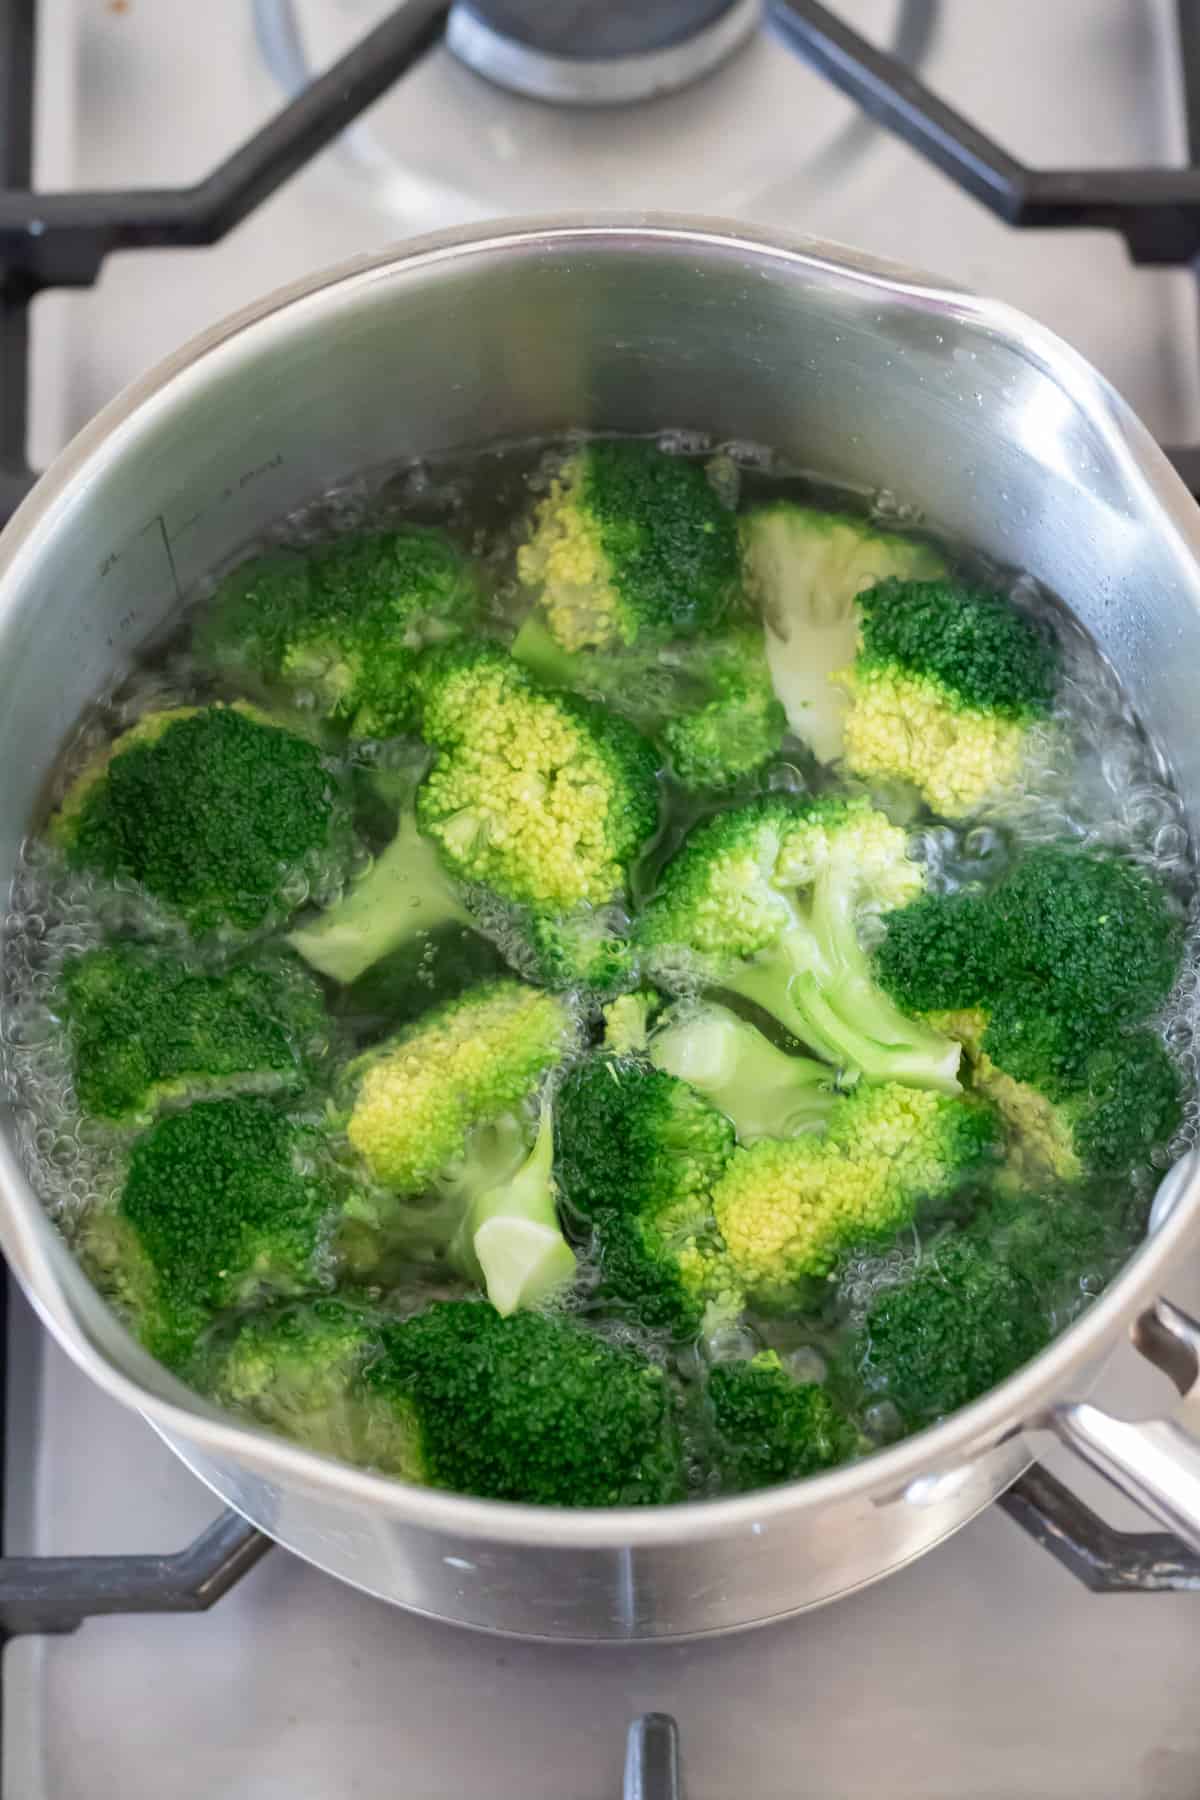 Boiling the broccoli florets.